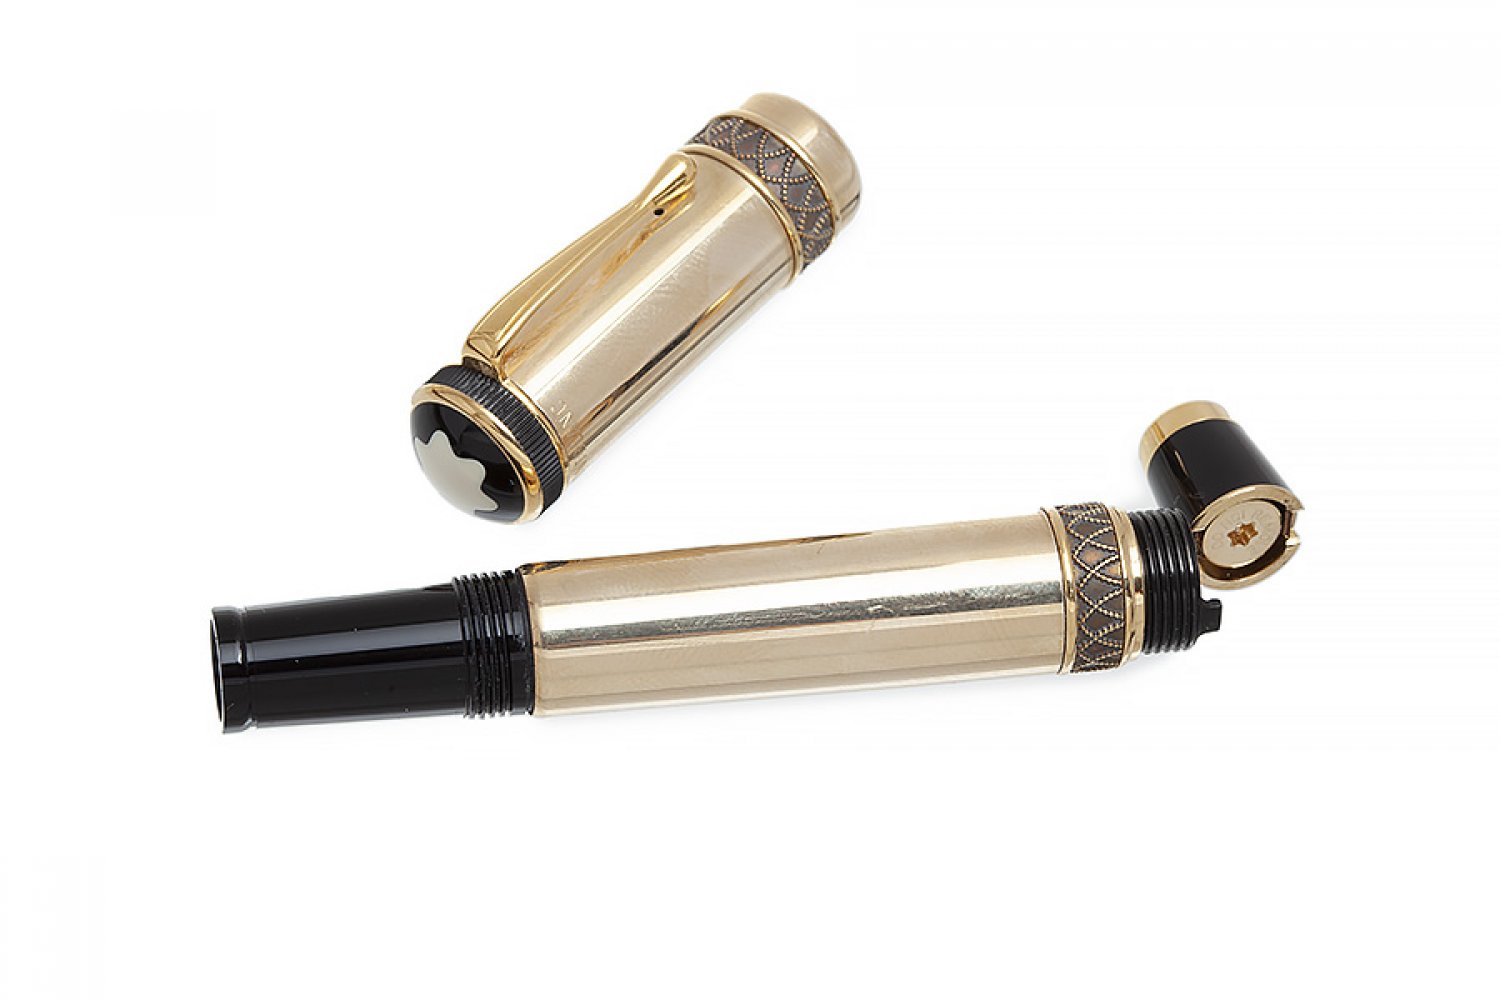 MONTBLANC FOUNTAIN PEN "FRIEDRICH II THE GREAT" ARTS PATTERNS COLLECTION, 1999Gold-plated barrel and - Image 3 of 4